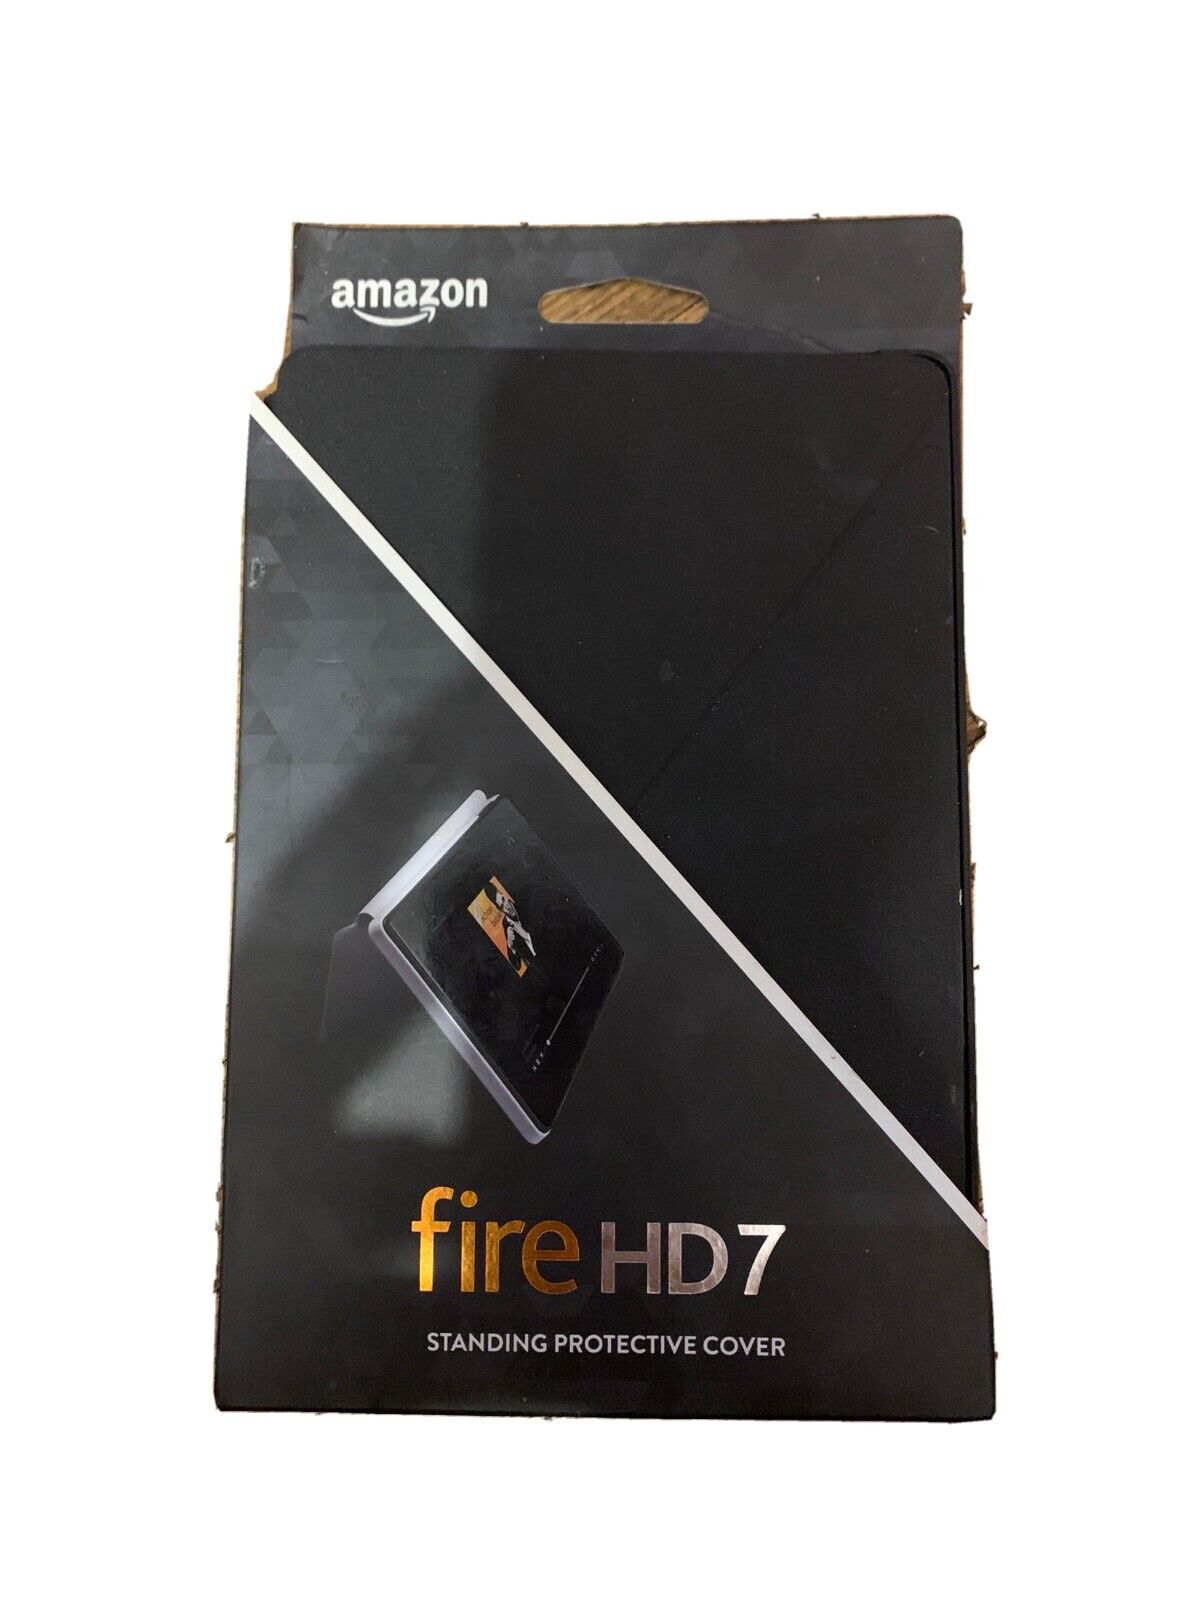 Amazon Standing Protective Case for Fire HD 7 Black